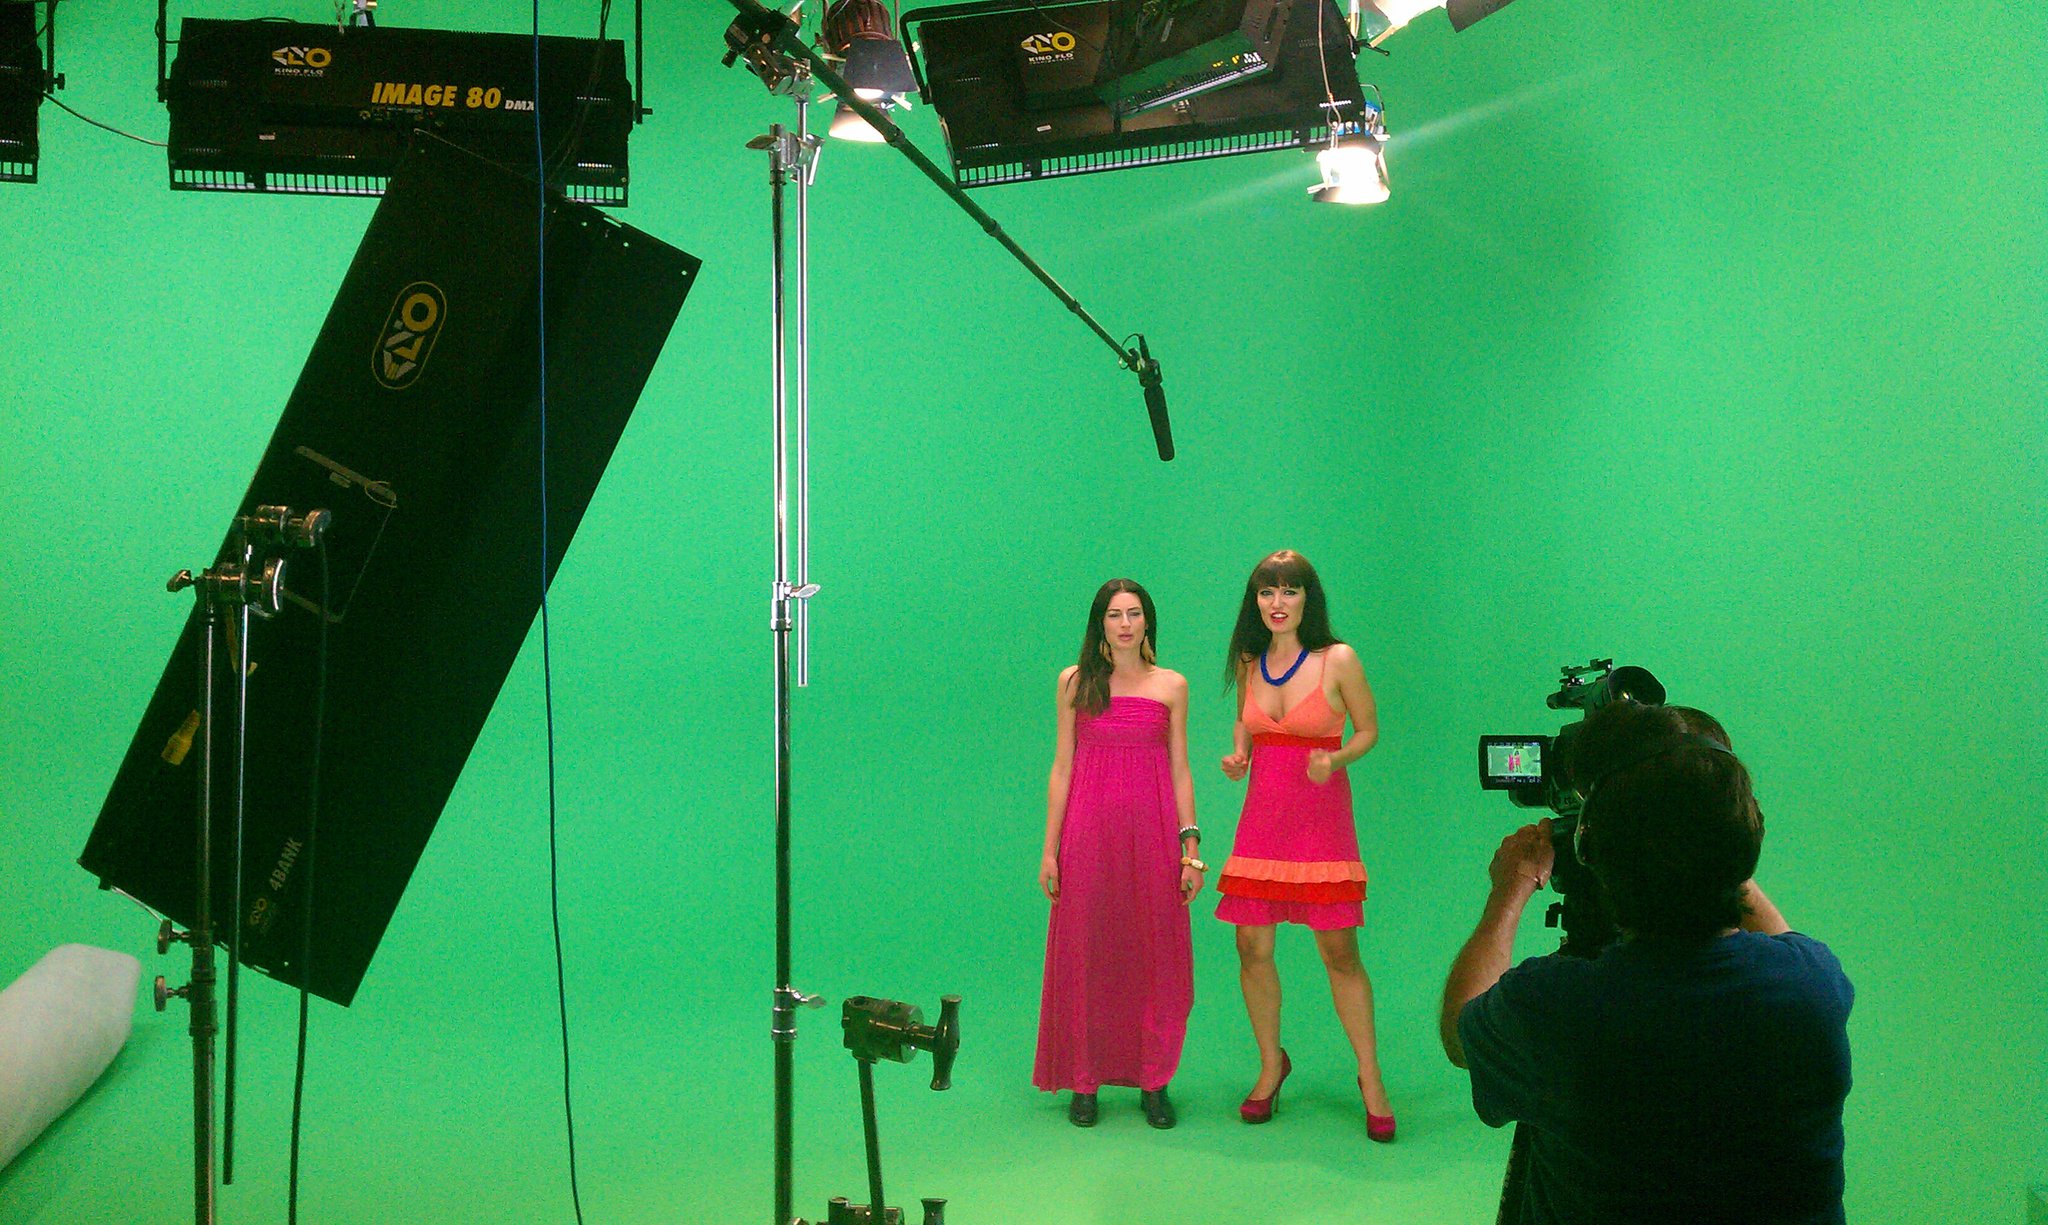 Samantha Gudstadt and Camille Solari on the set of 